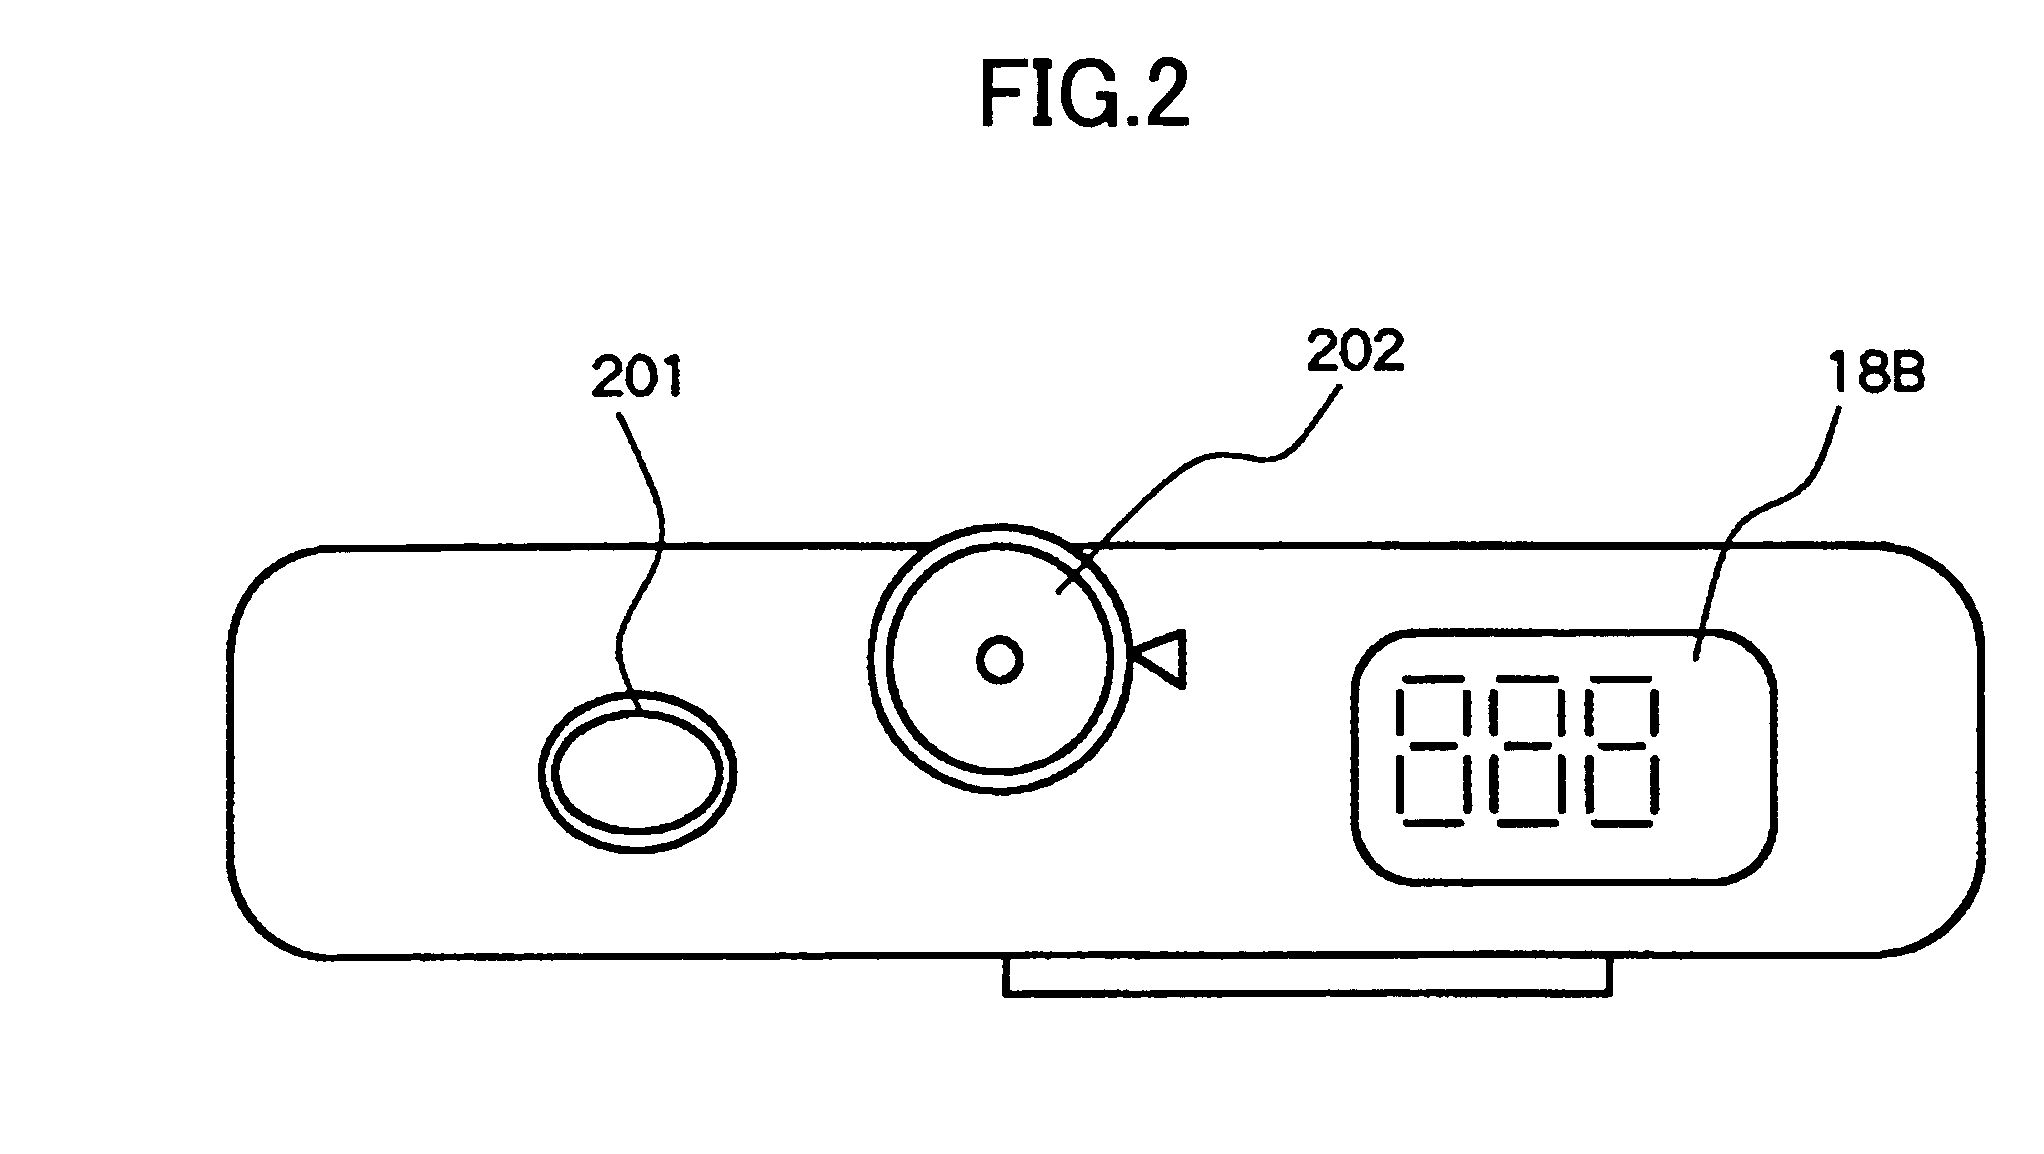 Imaging apparatus, a focusing method, a focus control method and a recording medium storing a program for executing such a method